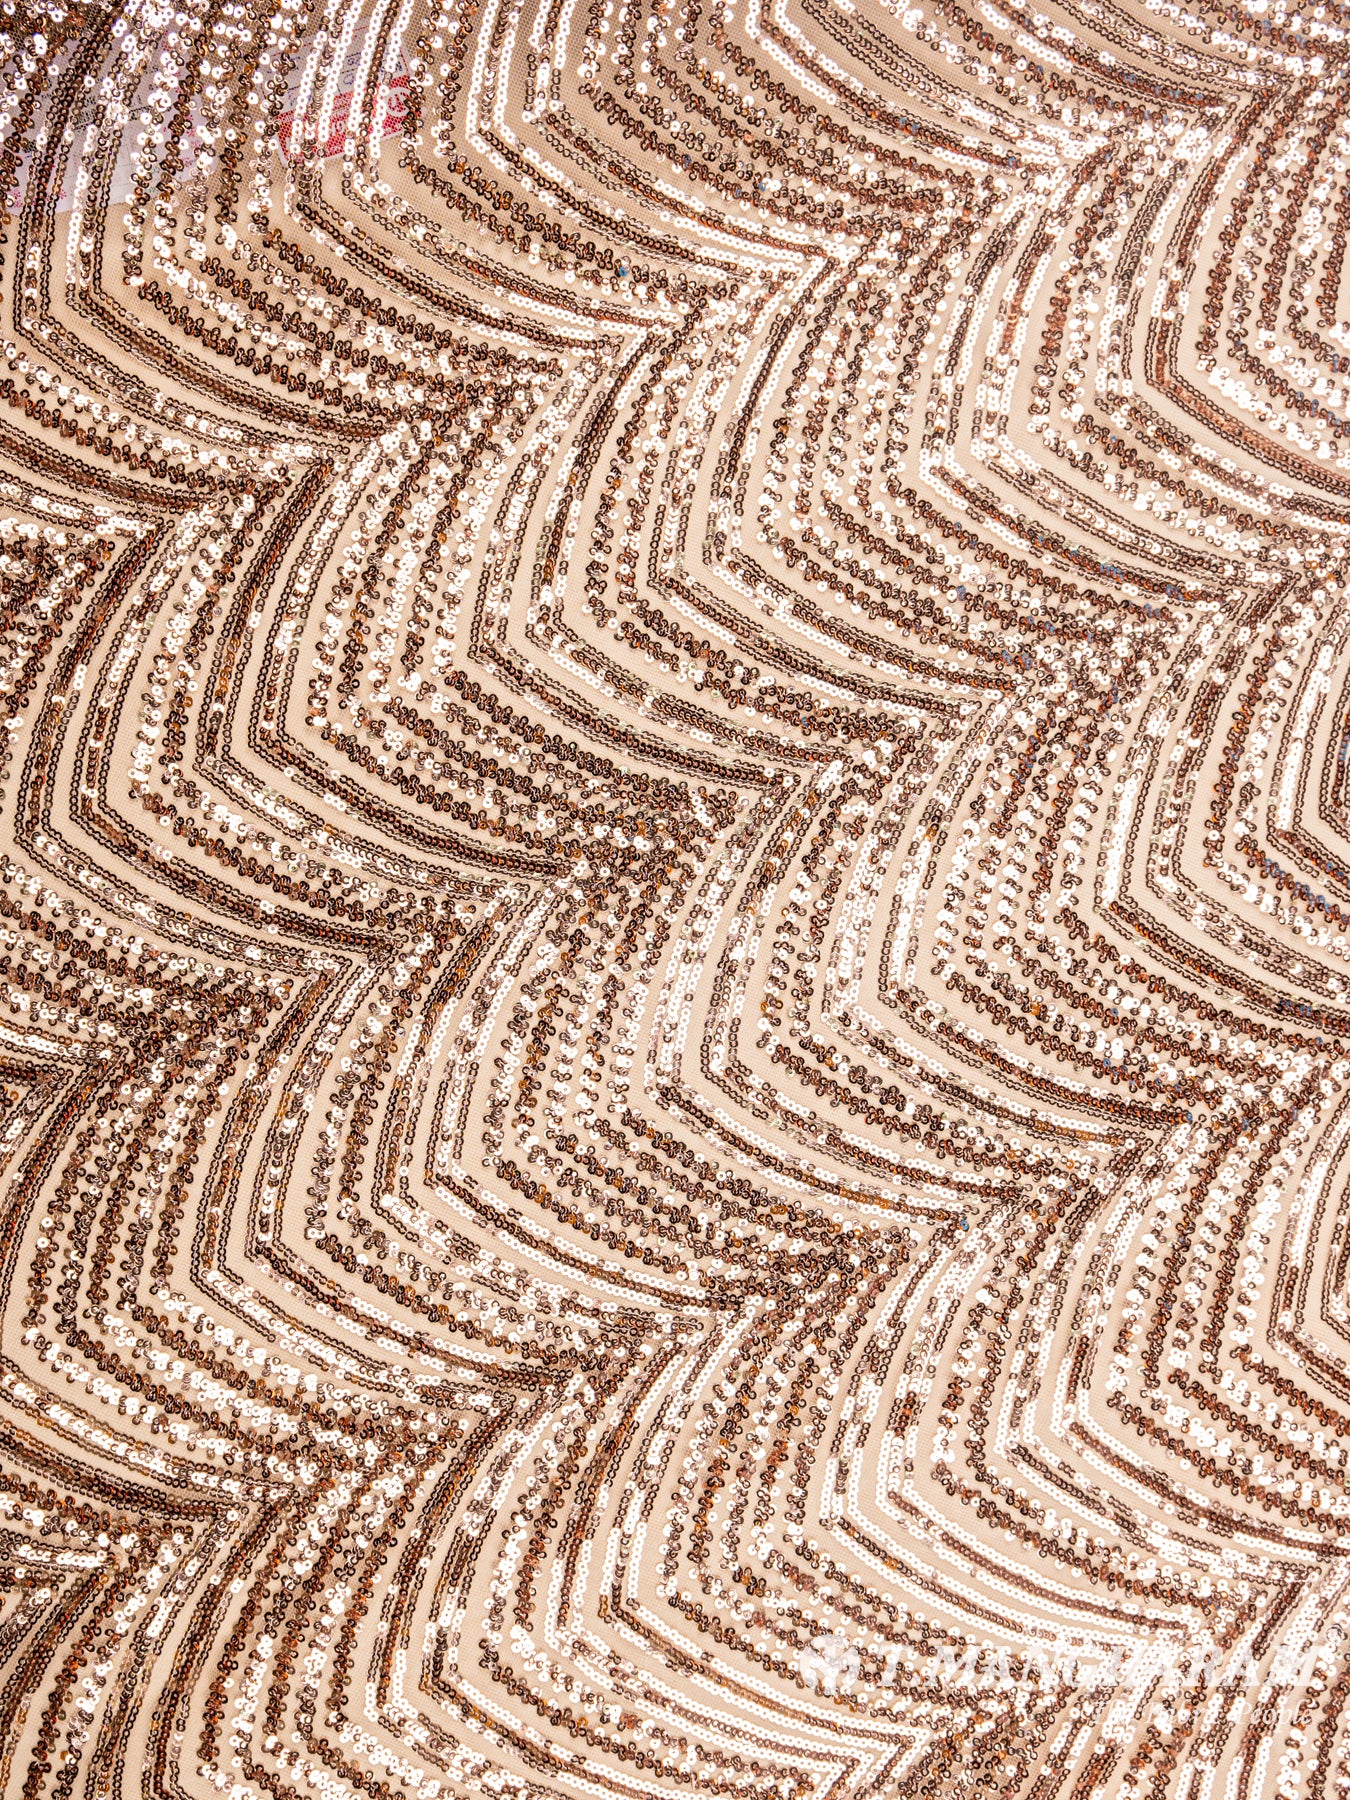 Rose Gold Sequin Net Fabric - EA1668 view-3